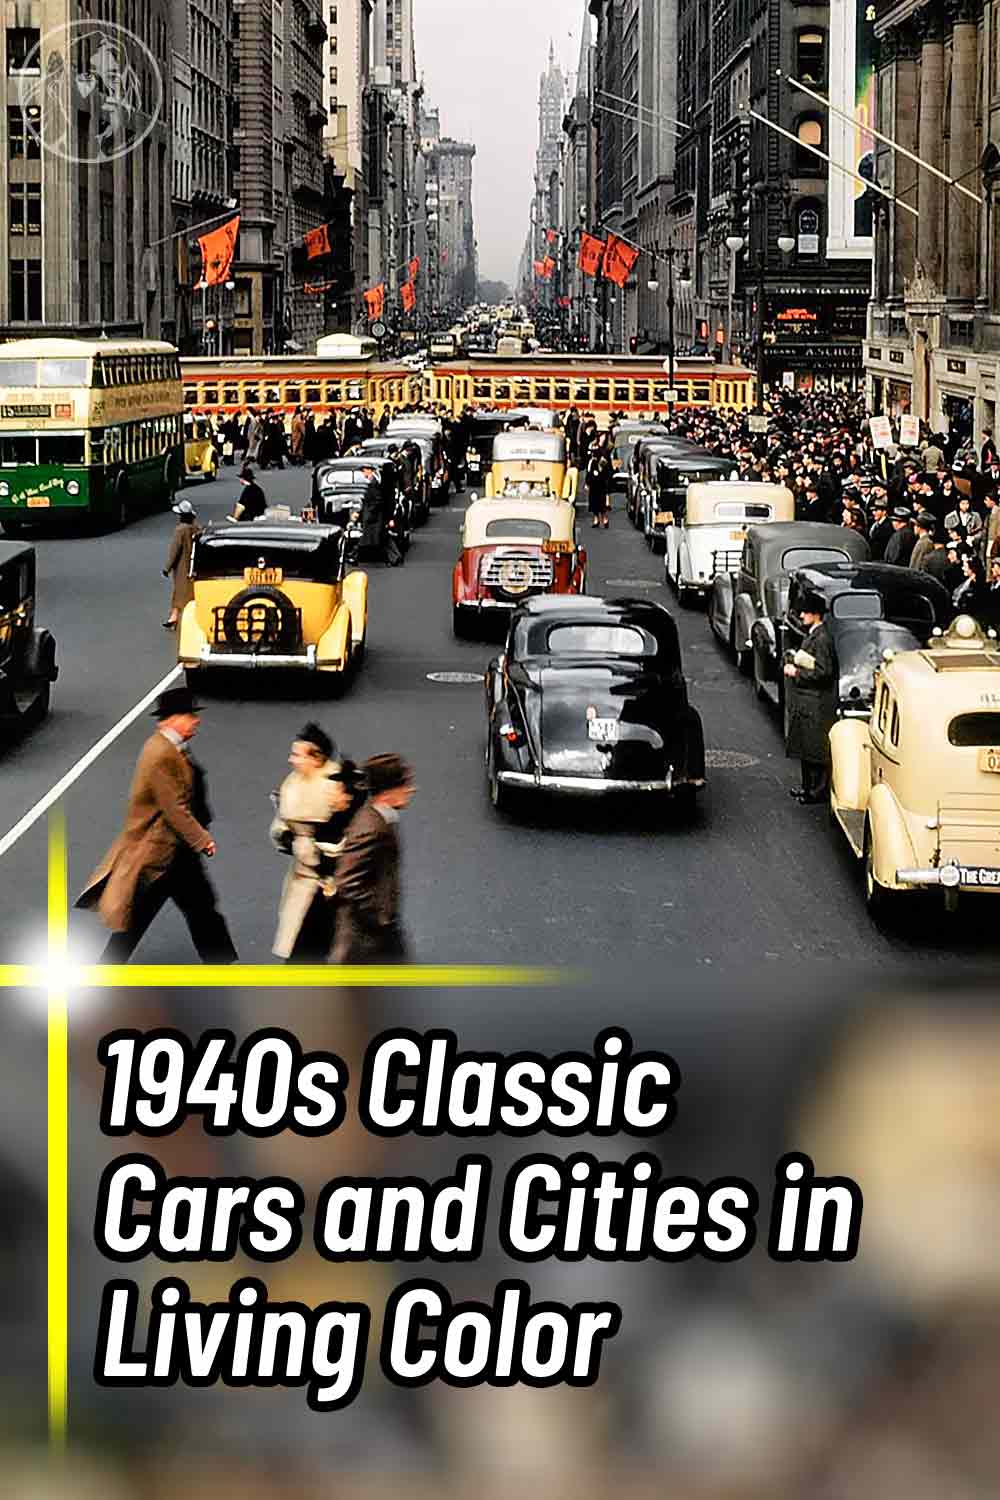 1940s Classic Cars and Cities in Living Color